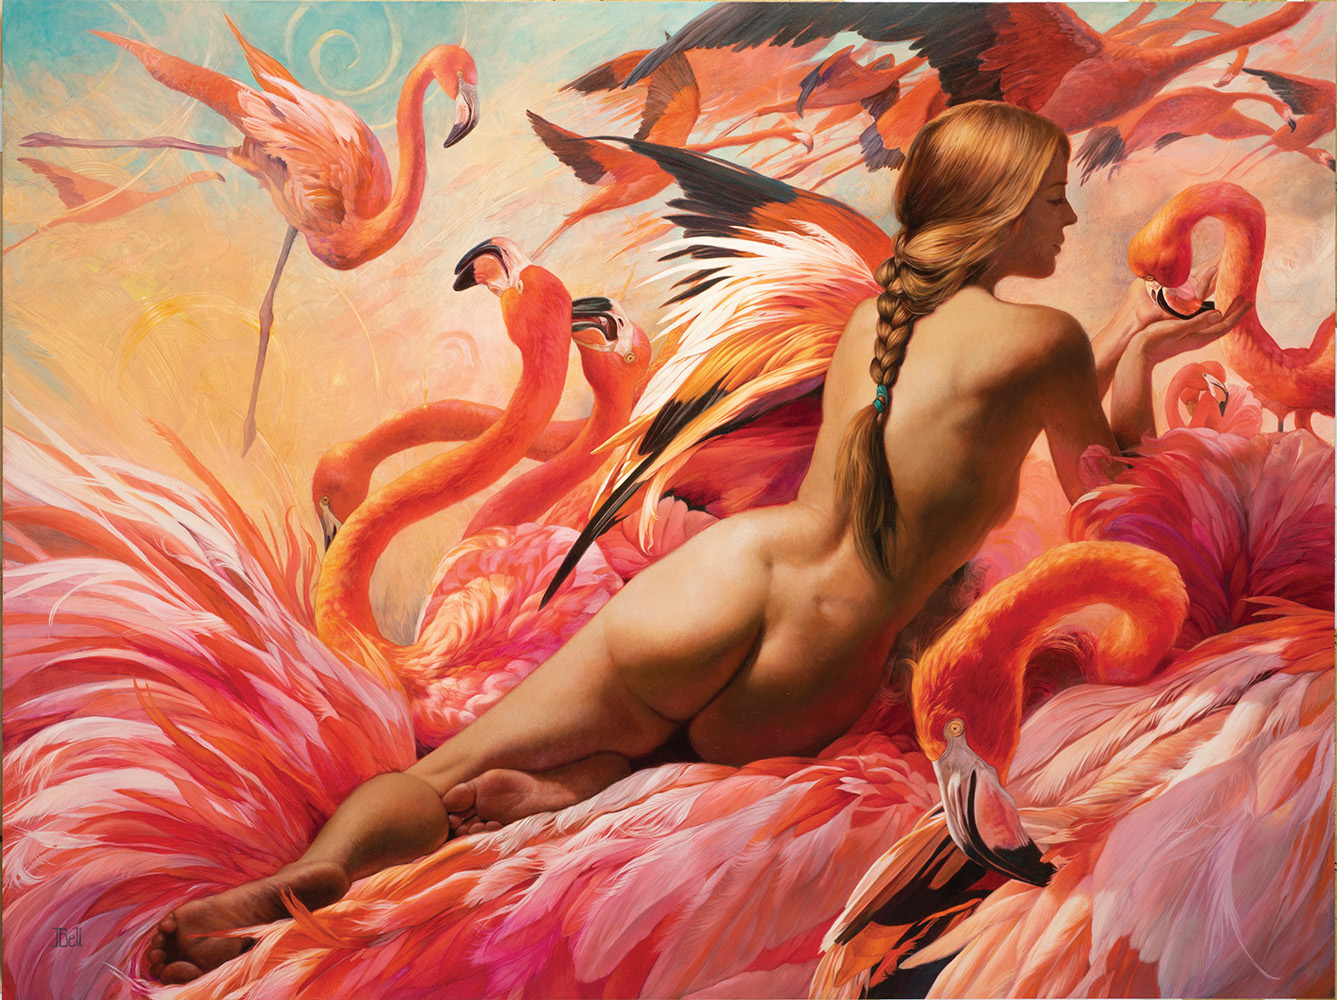 Painting of a women surrounded by pink flamingos.